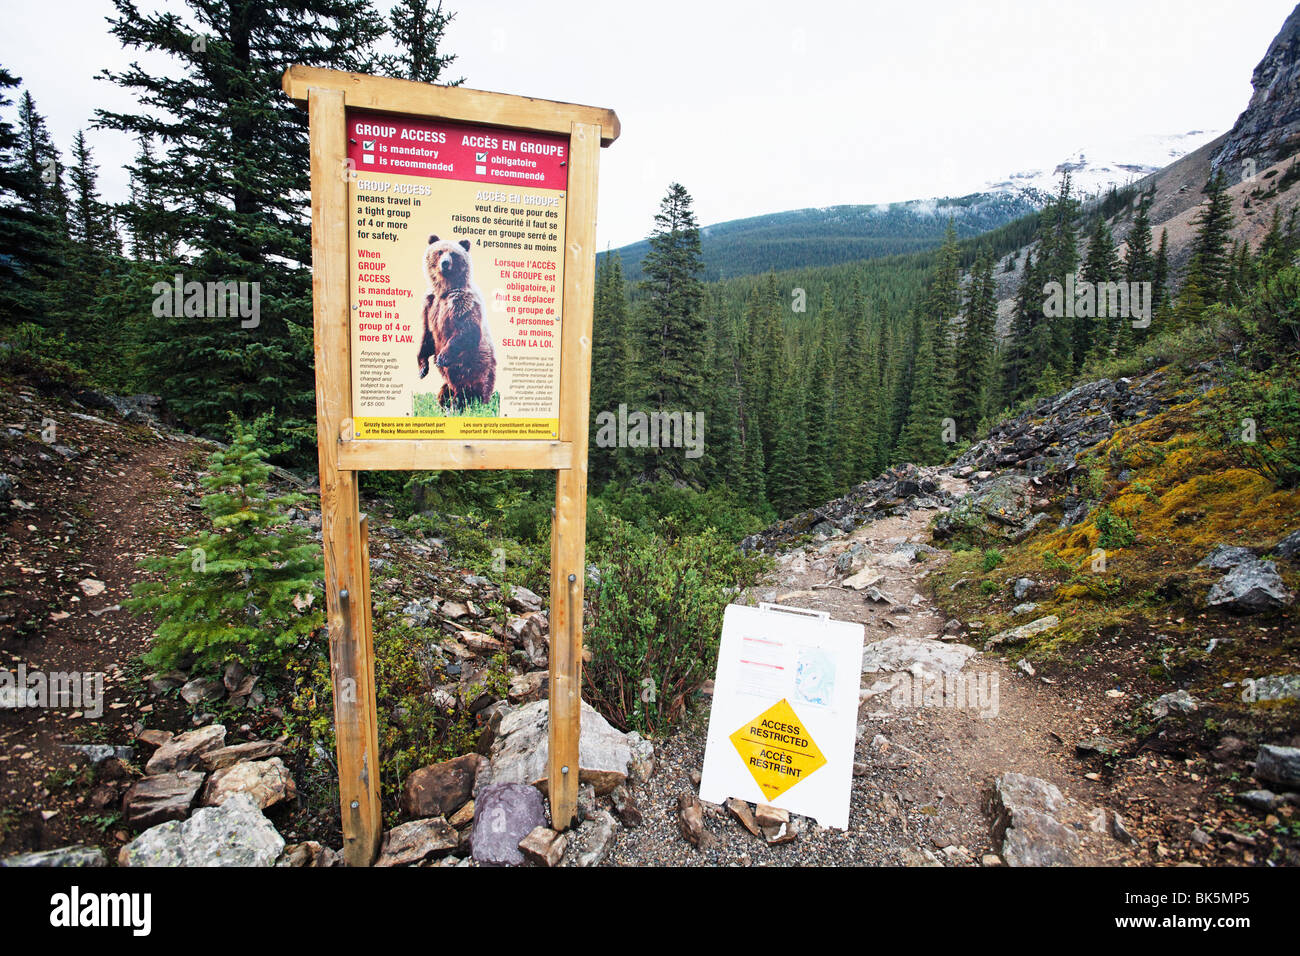 Group Access Mandatory Sign on a Hiking Trail, Banff National Park, Alberta, Canada Stock Photo